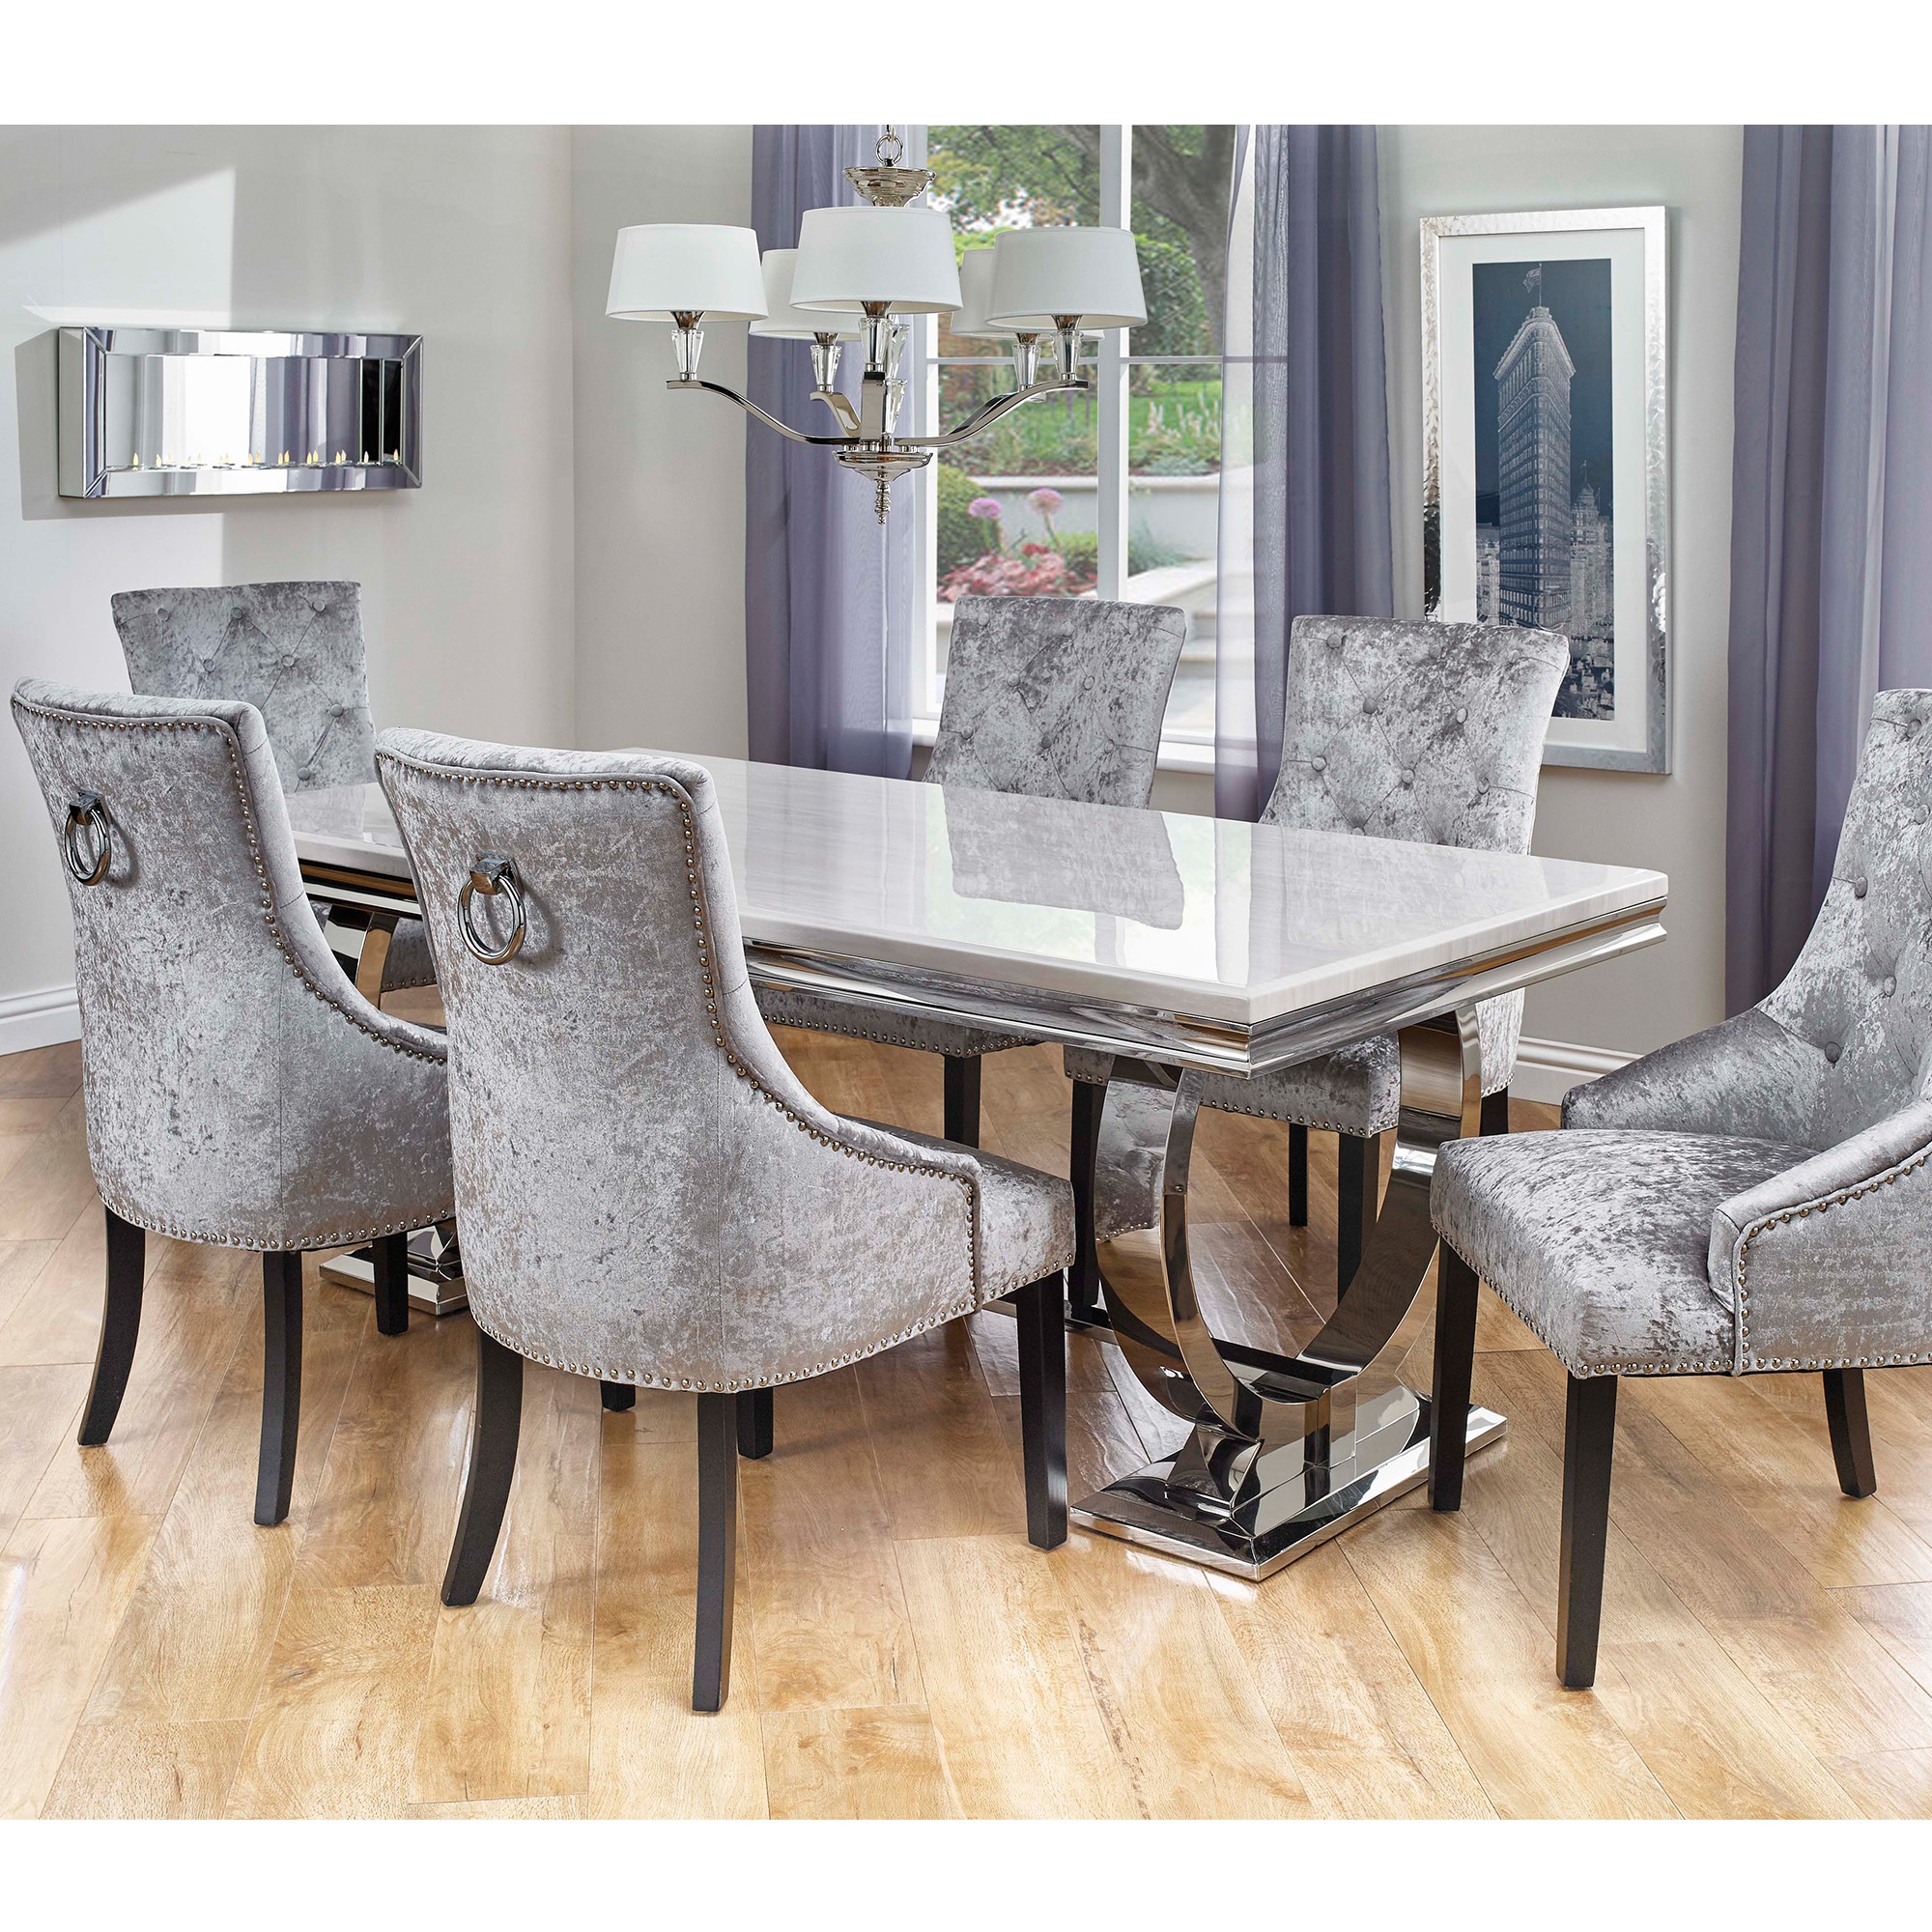 Cookes Collection valentina dining table and 6 chairs JTXSXDQ